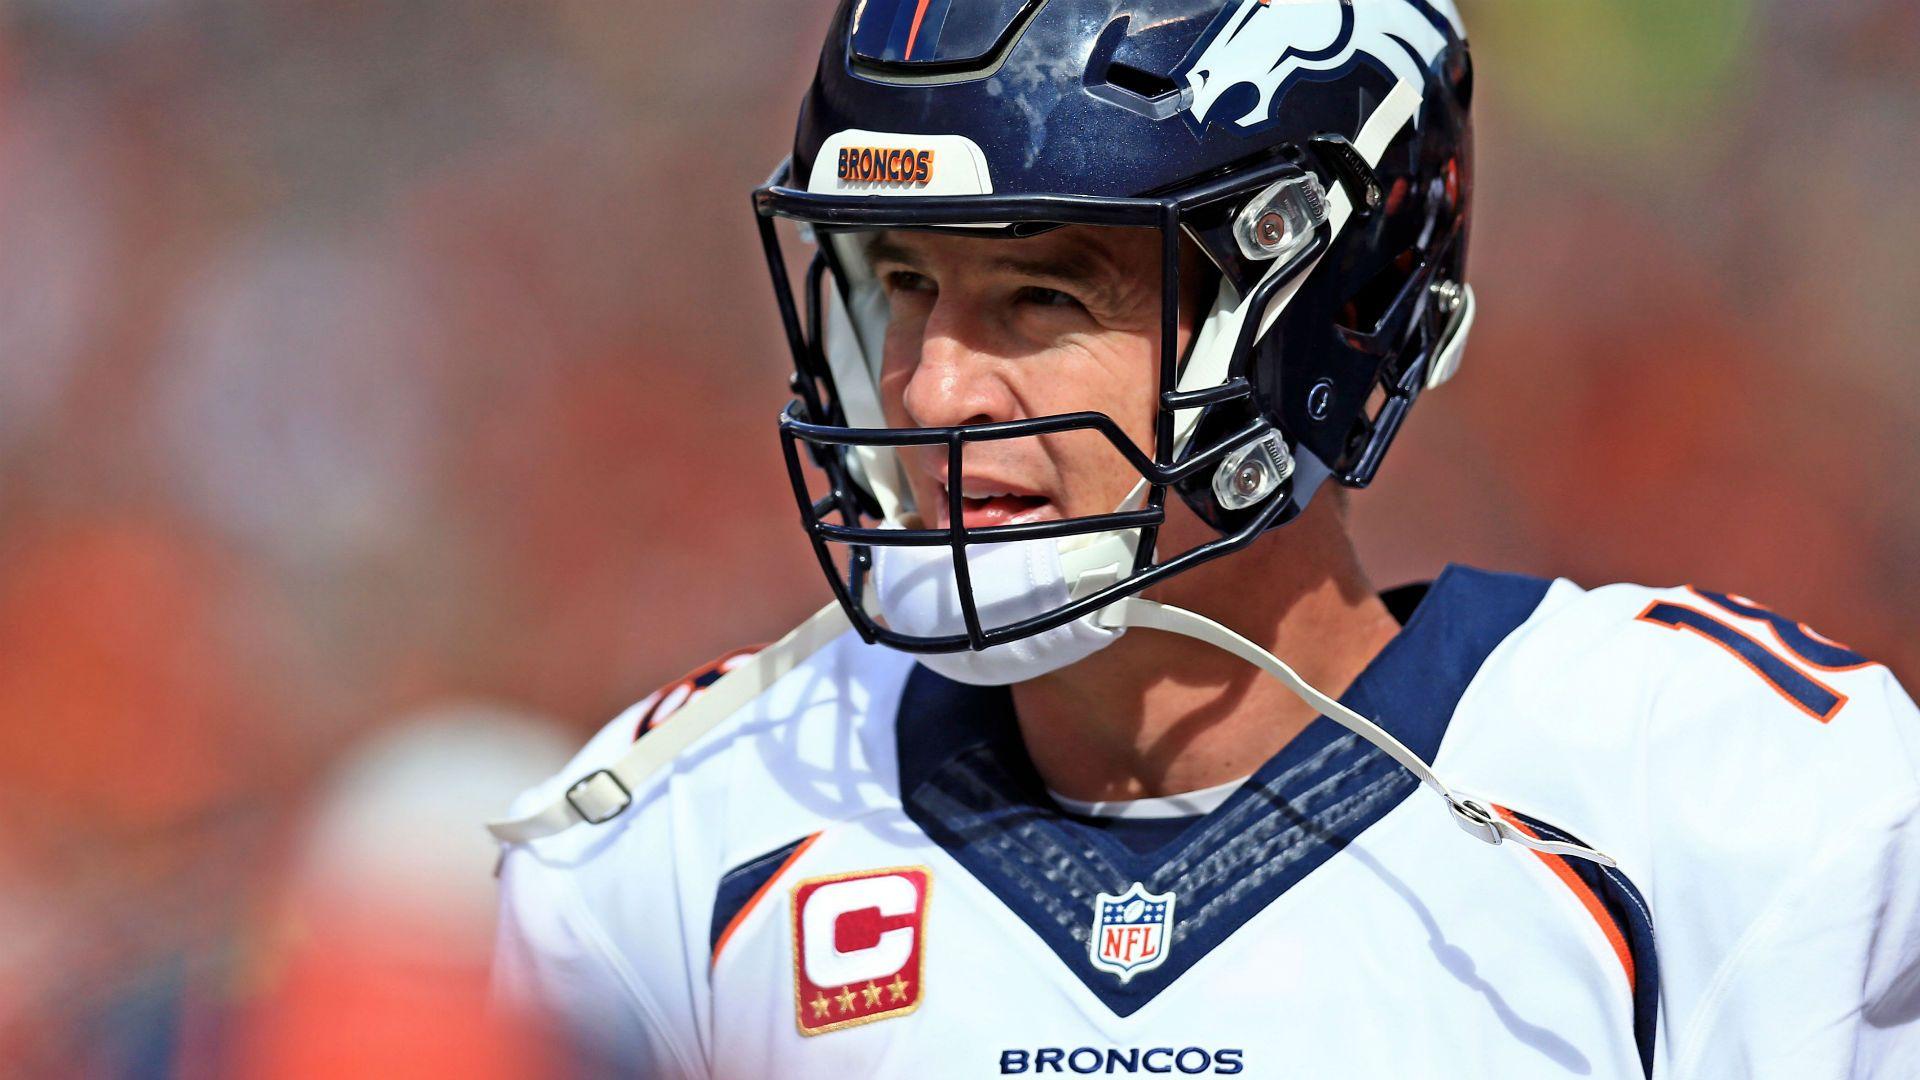 Peyton Manning's future with Broncos could hinge on 'pivotal